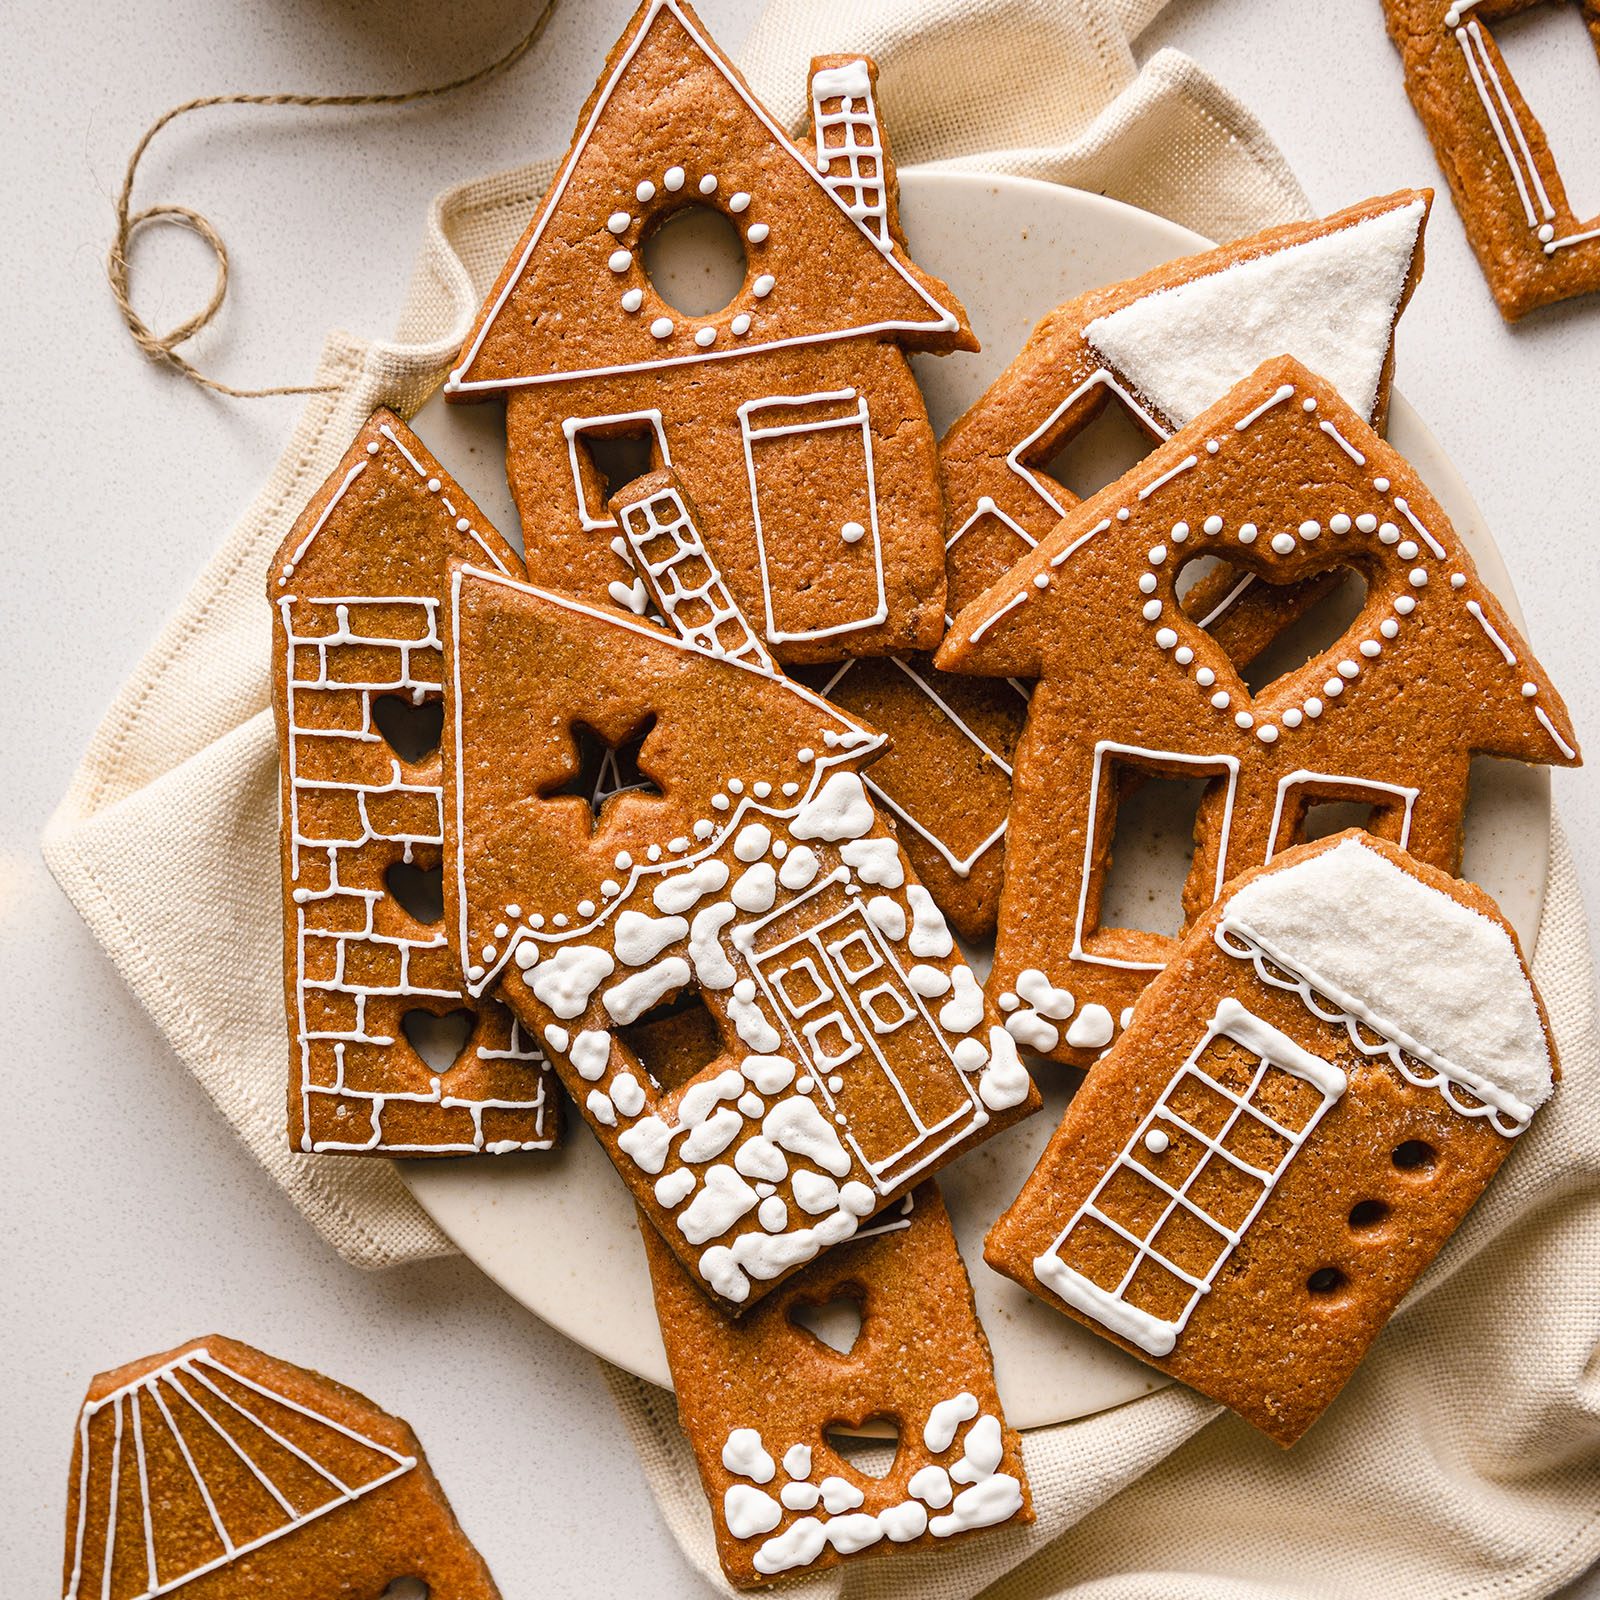 Starbucks Gingerbread Houses Holiday Decorations Food